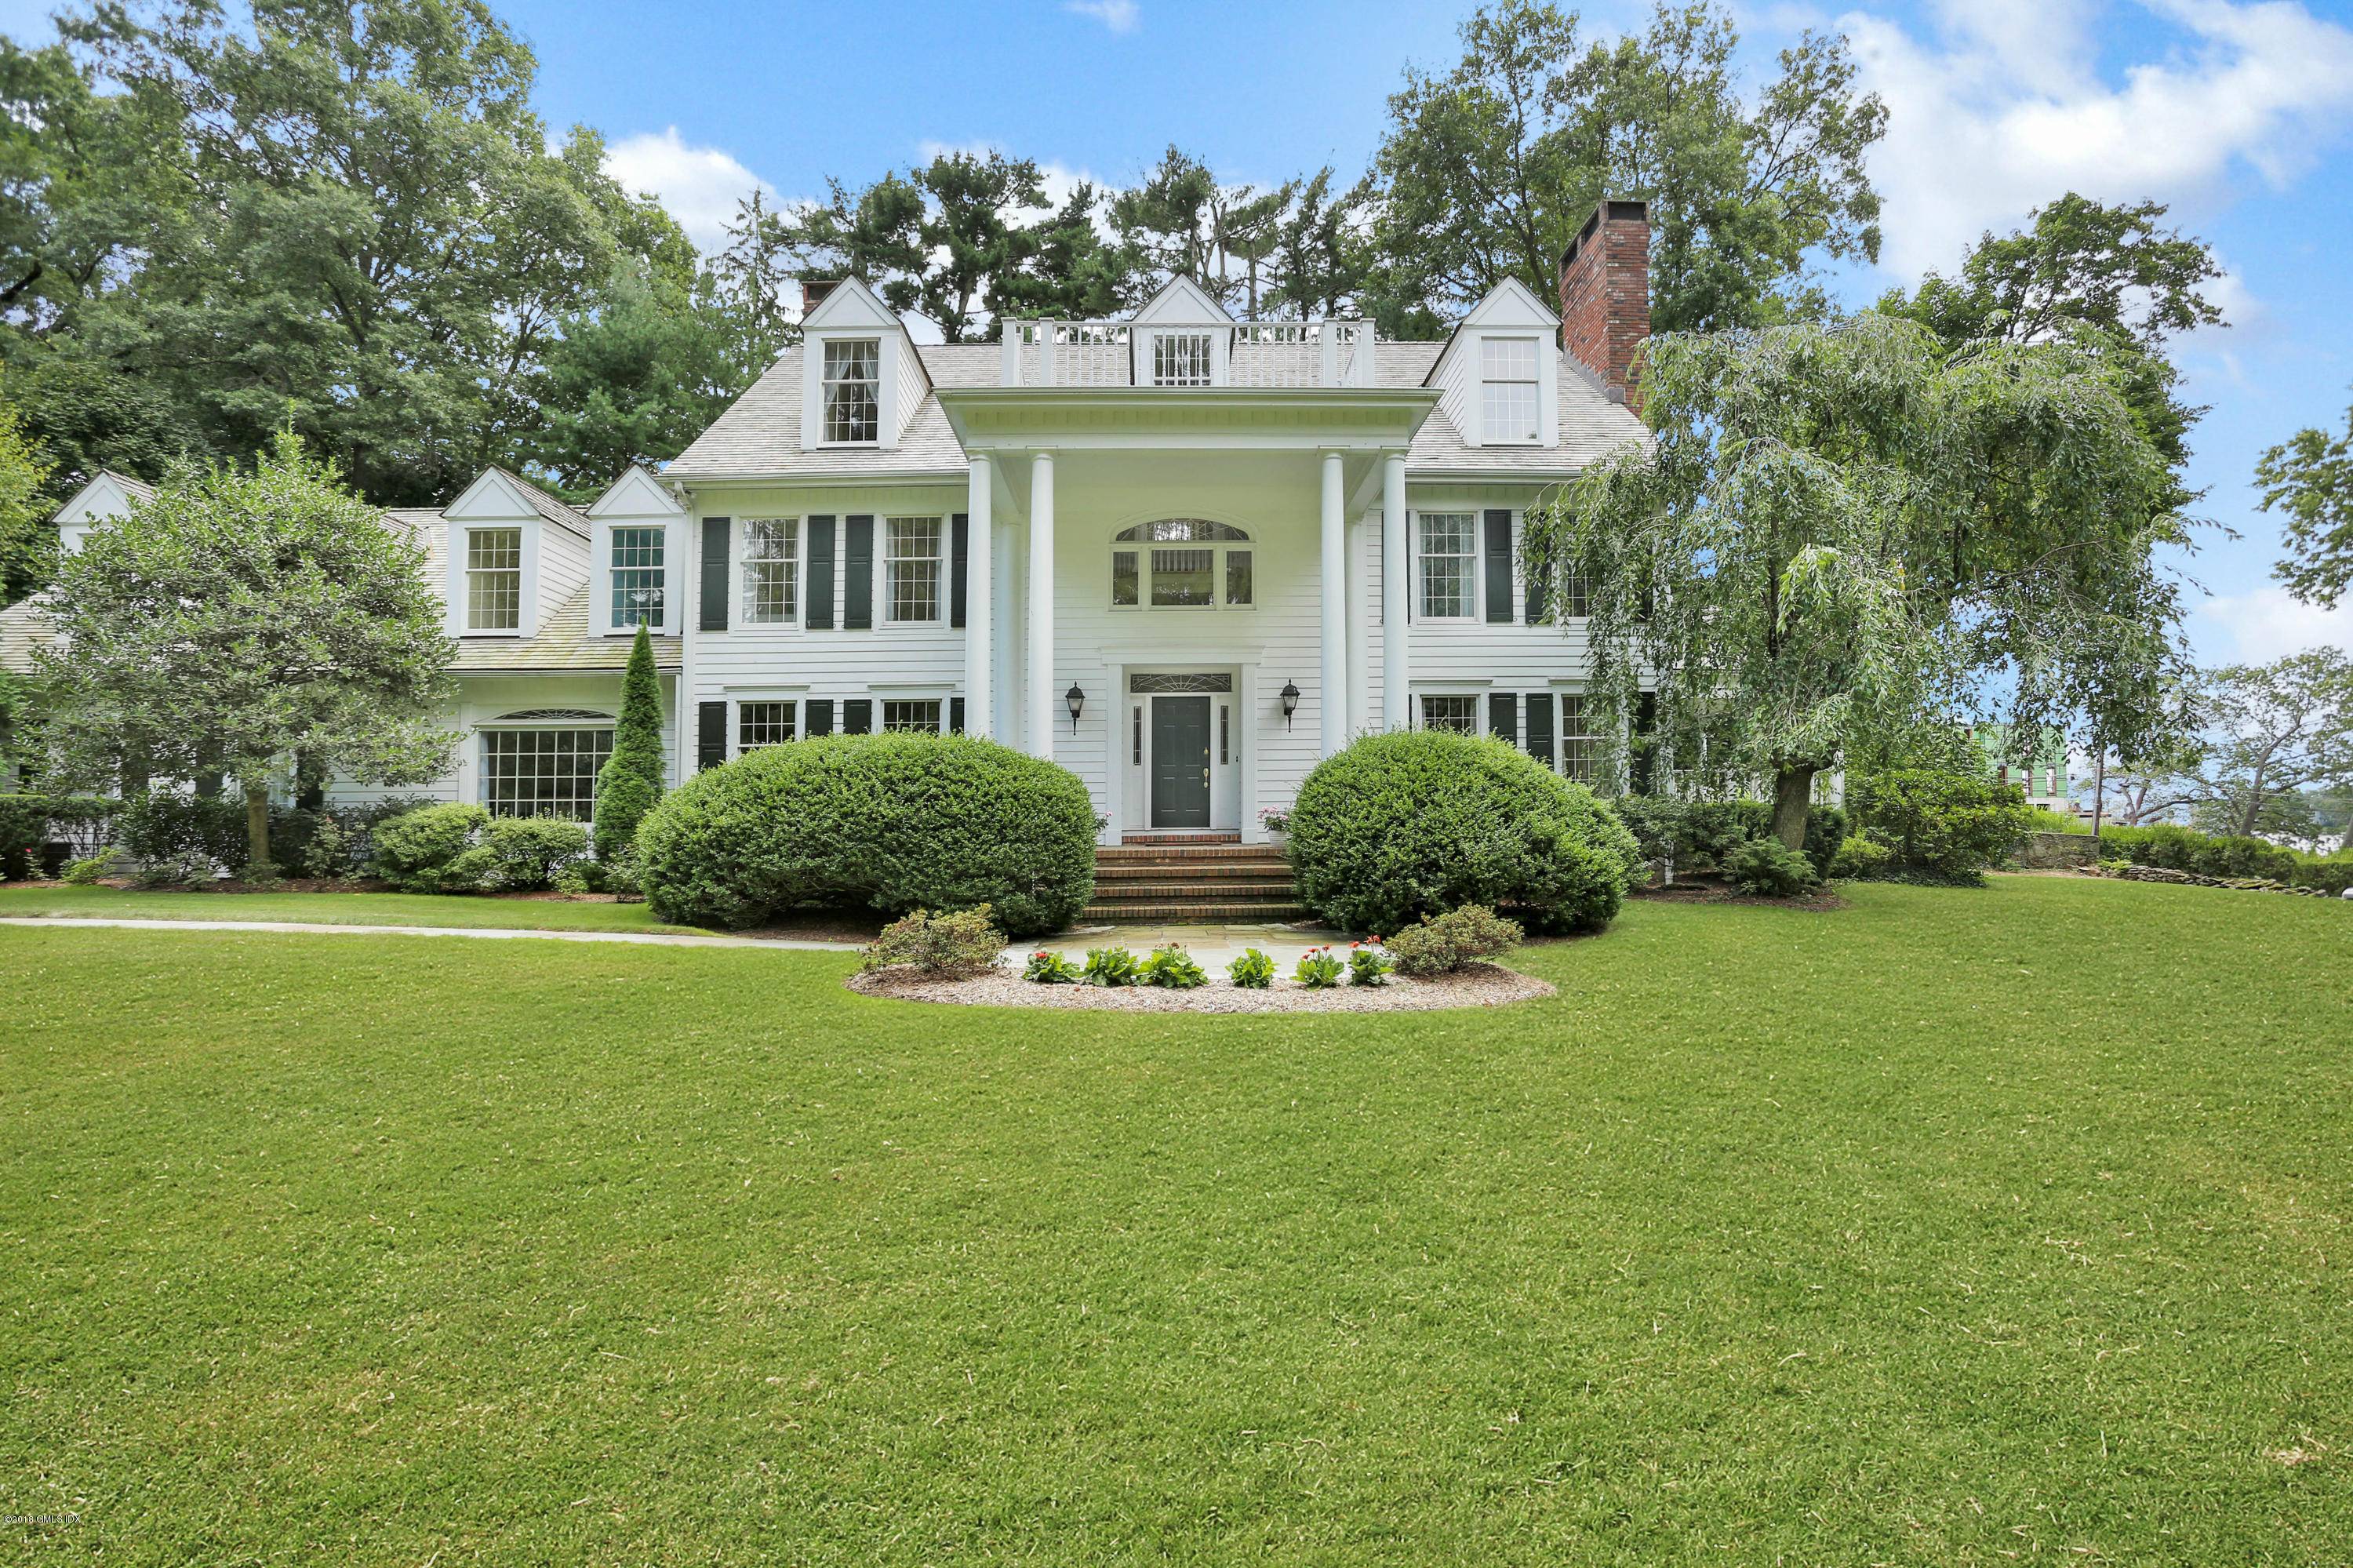 Belle Haven Association Stately, updated six bedroom colonial with tranquil water views graces one private acre on a quiet lane in the coveted enclave of Belle Haven surrounded by Greenwich's ...